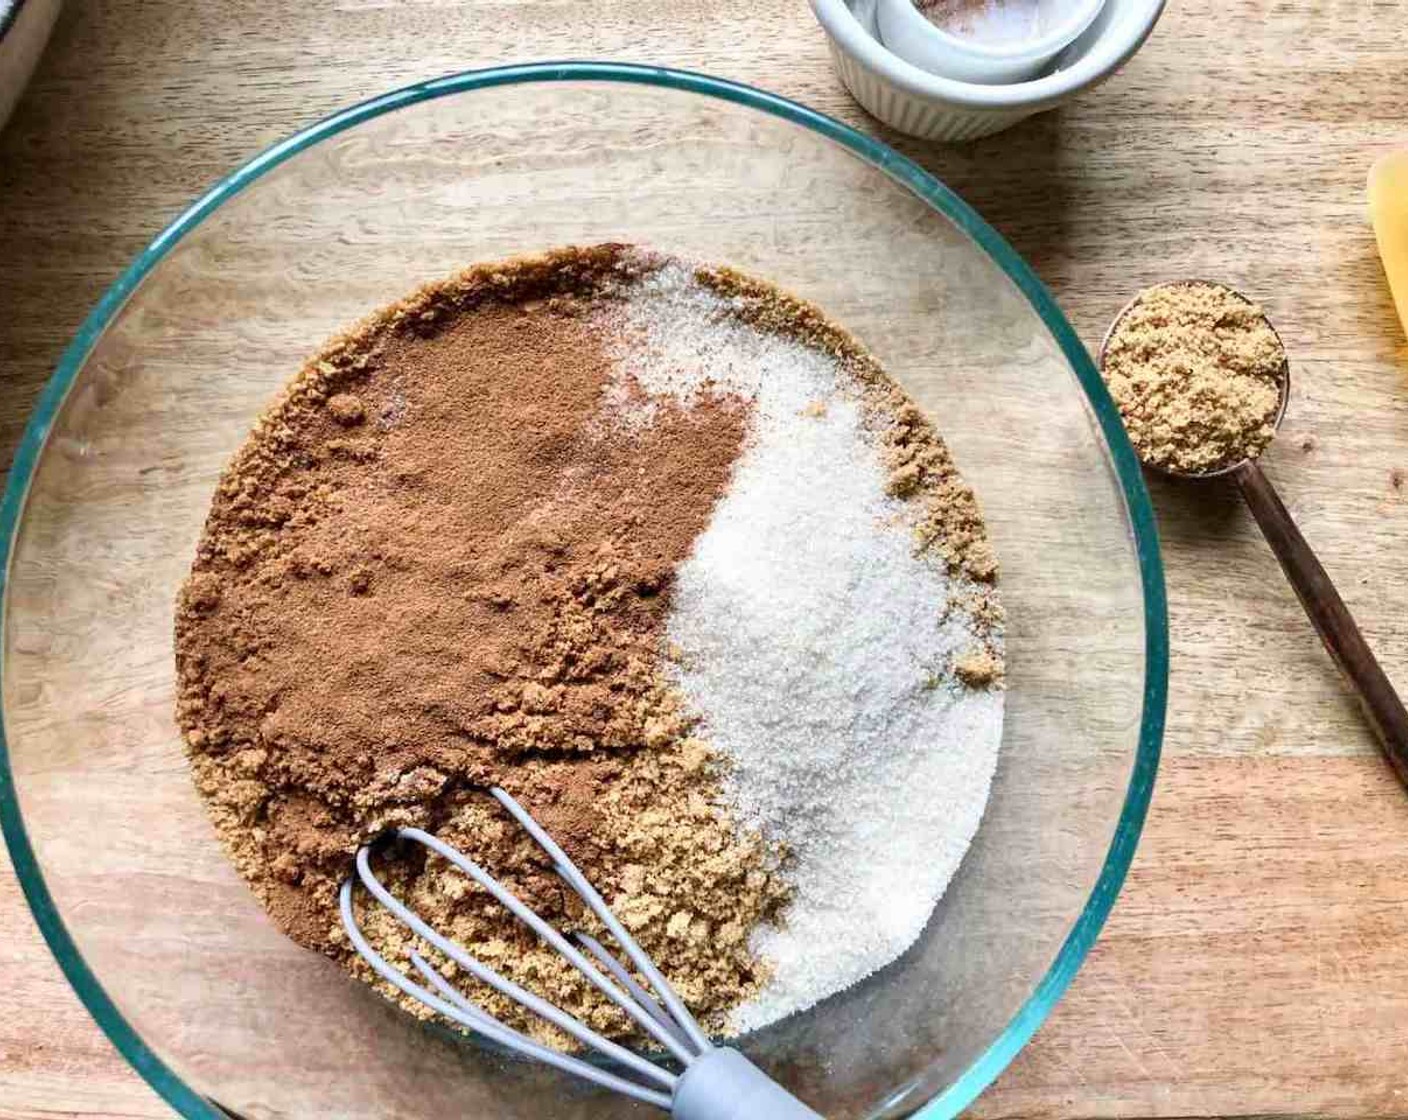 step 3 To make the Graham Cracker Crust, combine the remaining crumbs, Granulated Sugar (2 Tbsp), Ground Cinnamon (1 tsp), and Salt (1/8 tsp) in a bowl, stirring well. Stir in 2 Tbsp of Farmhouse Eggs® Large Brown Egg (1) and Butter (2 Tbsp).